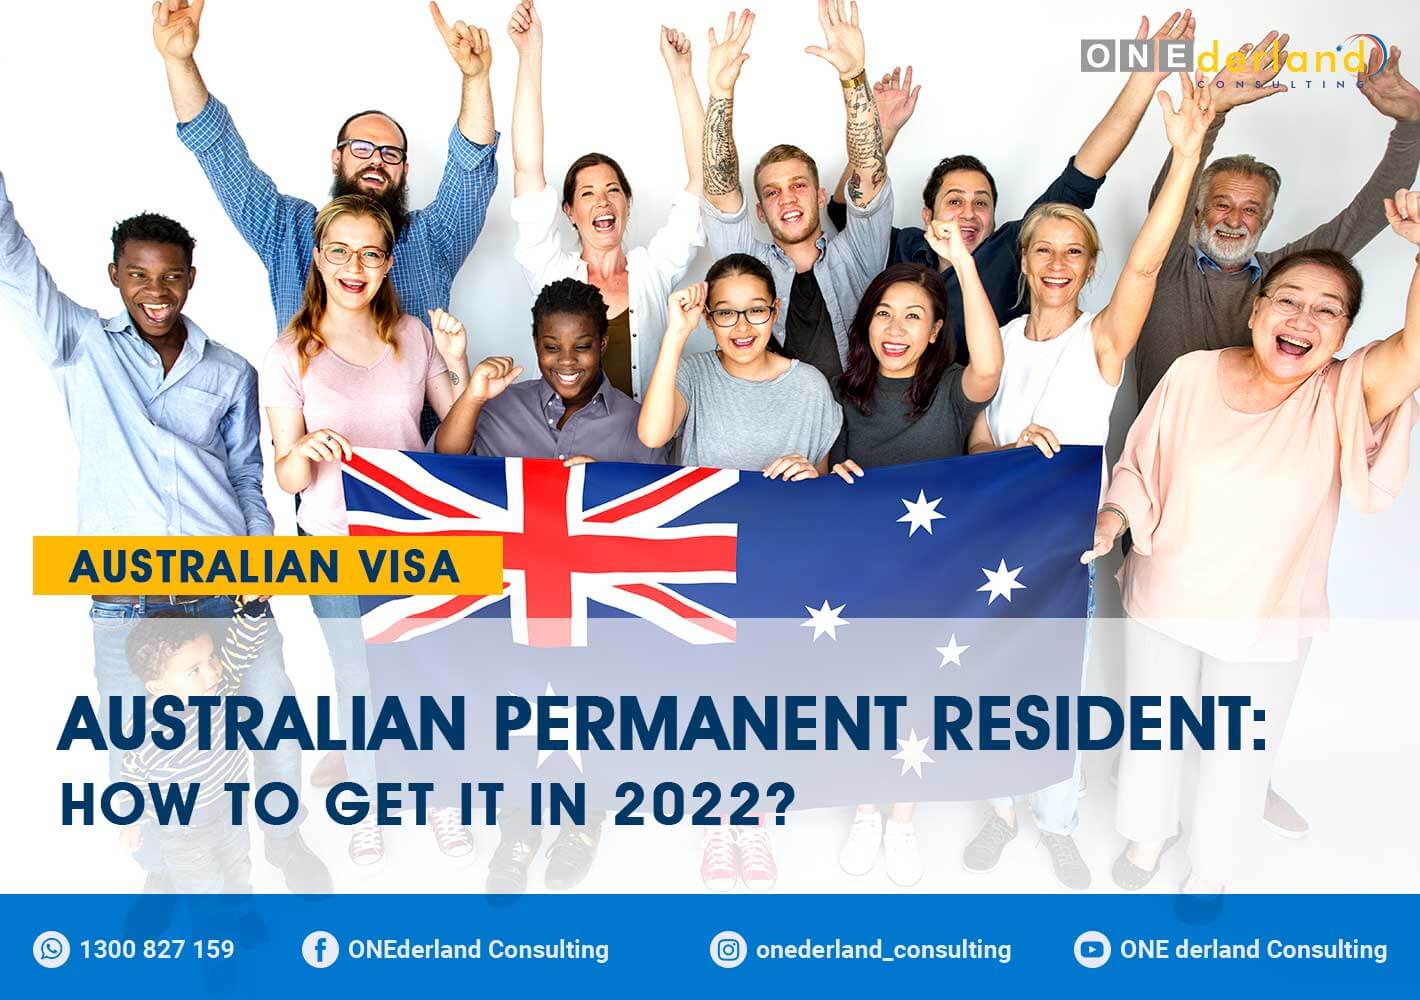 3 Ways to Become an Australian Permanent Resident in 2022